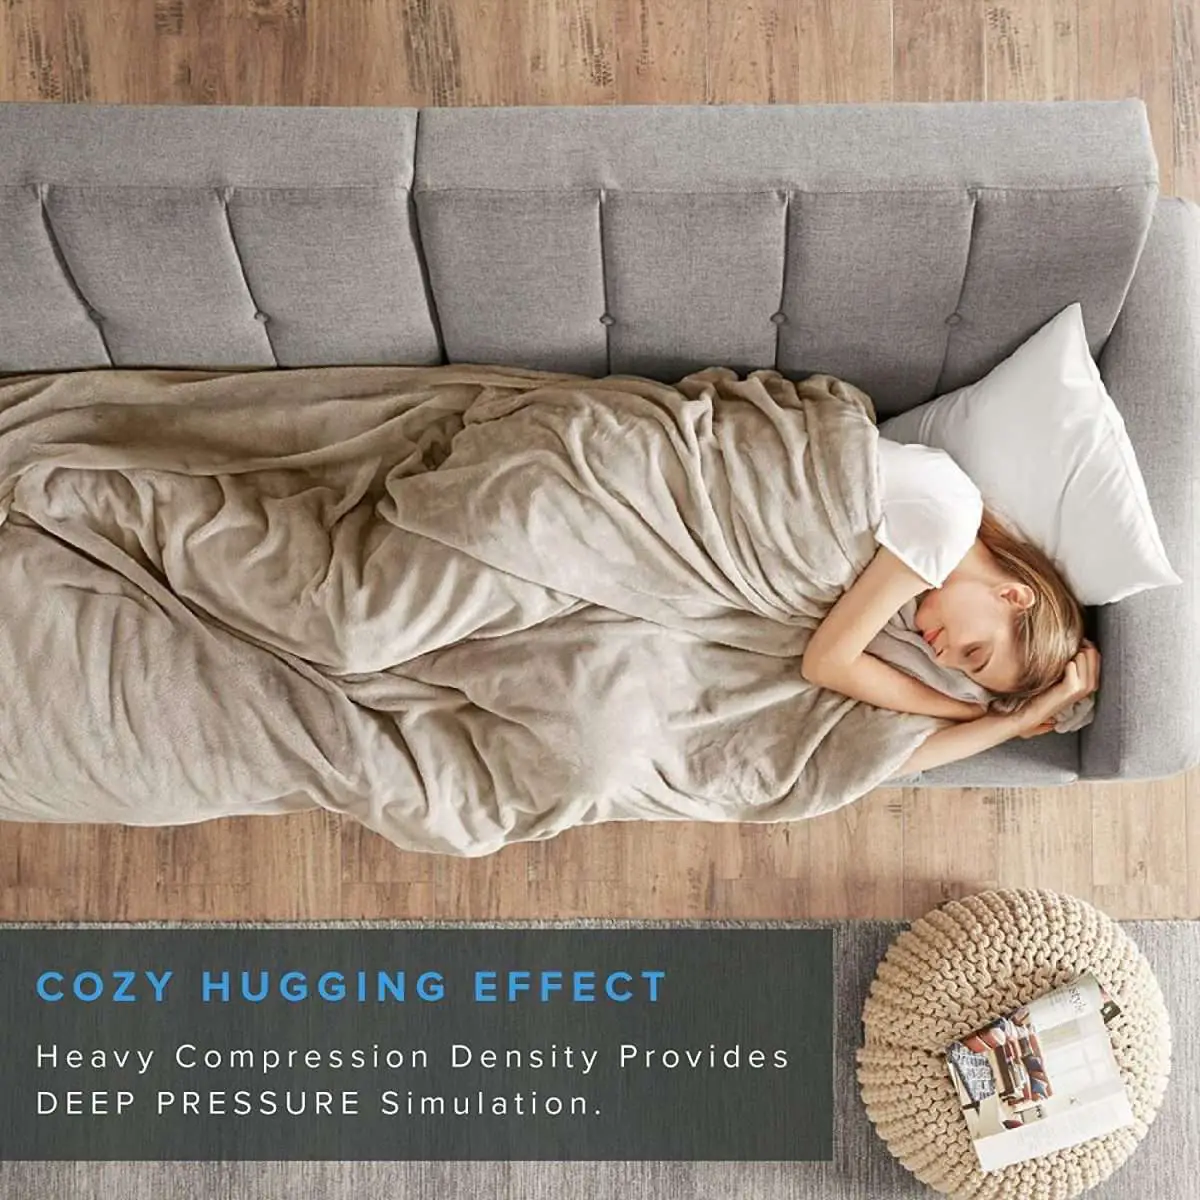 24 Products Great For Anyone Who Is A Hot Sleeper